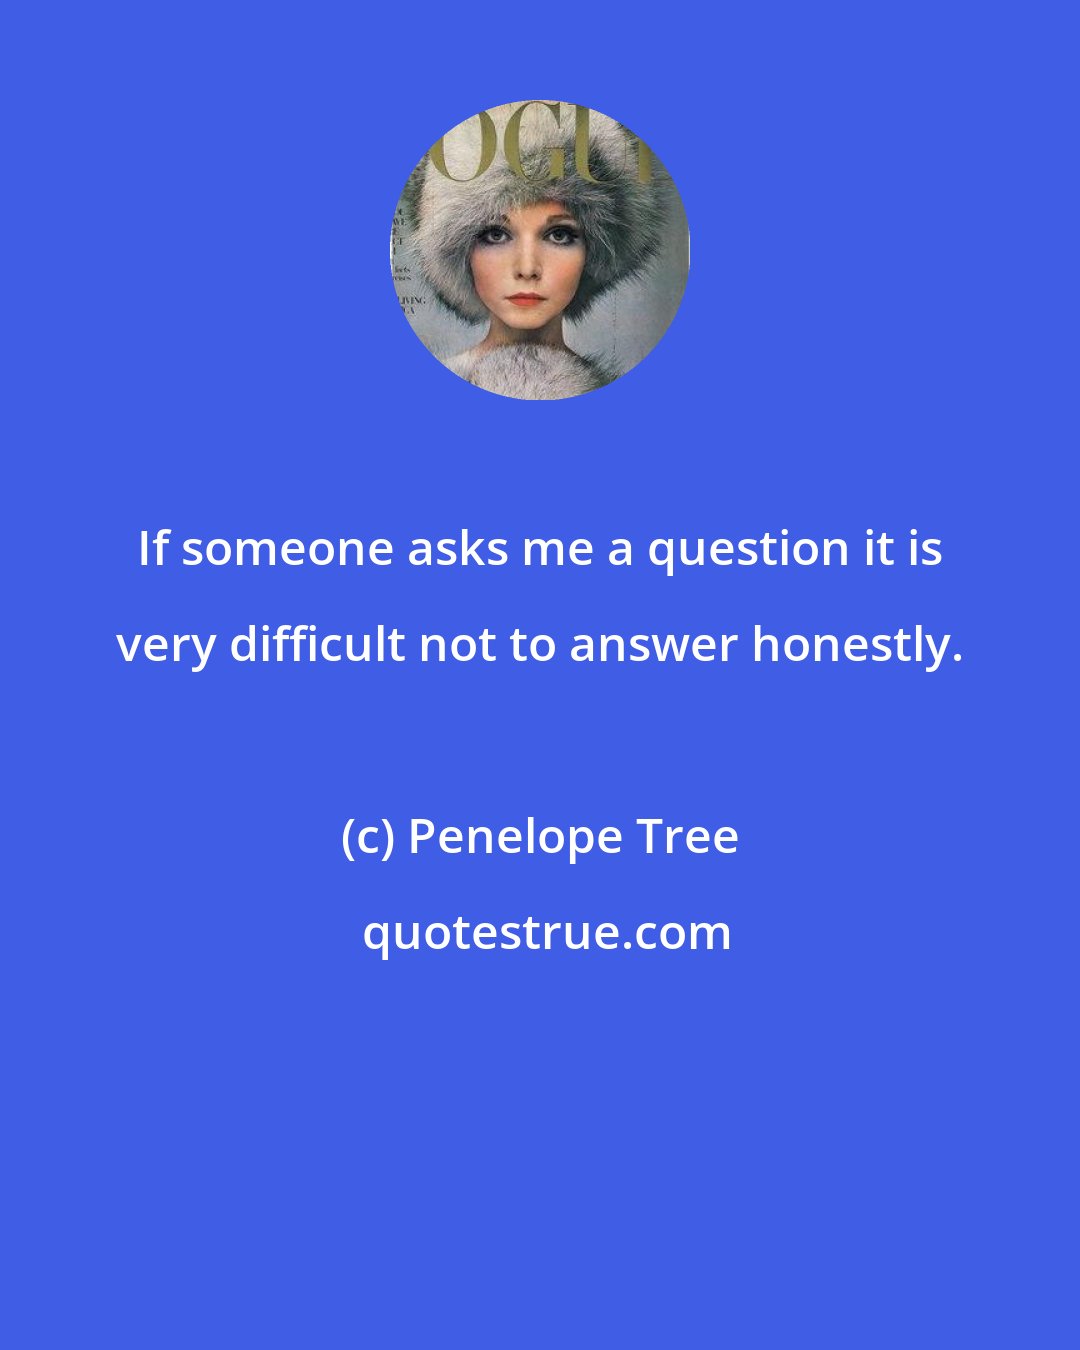 Penelope Tree: If someone asks me a question it is very difficult not to answer honestly.